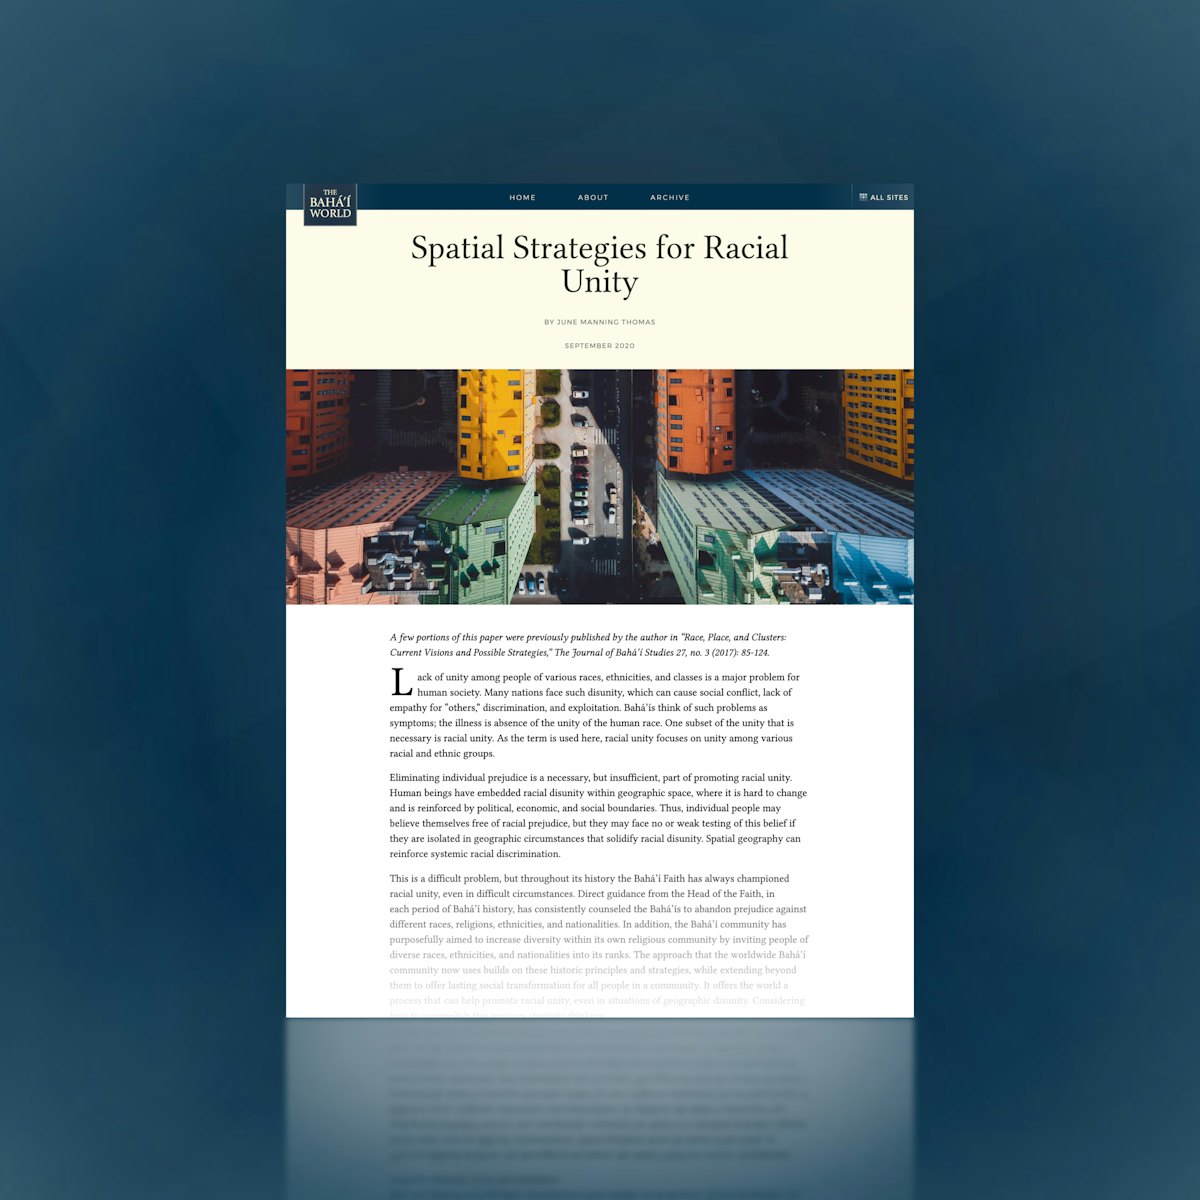 Overcoming the long-standing plague of racial injustice is the subject of the article “Spatial Strategies for Racial Unity,” which inquires into the nature and approaches of Bahá’í educational programs and community building efforts which seek, in the context of neighborhoods and villages, to raise capacity for service to humanity.